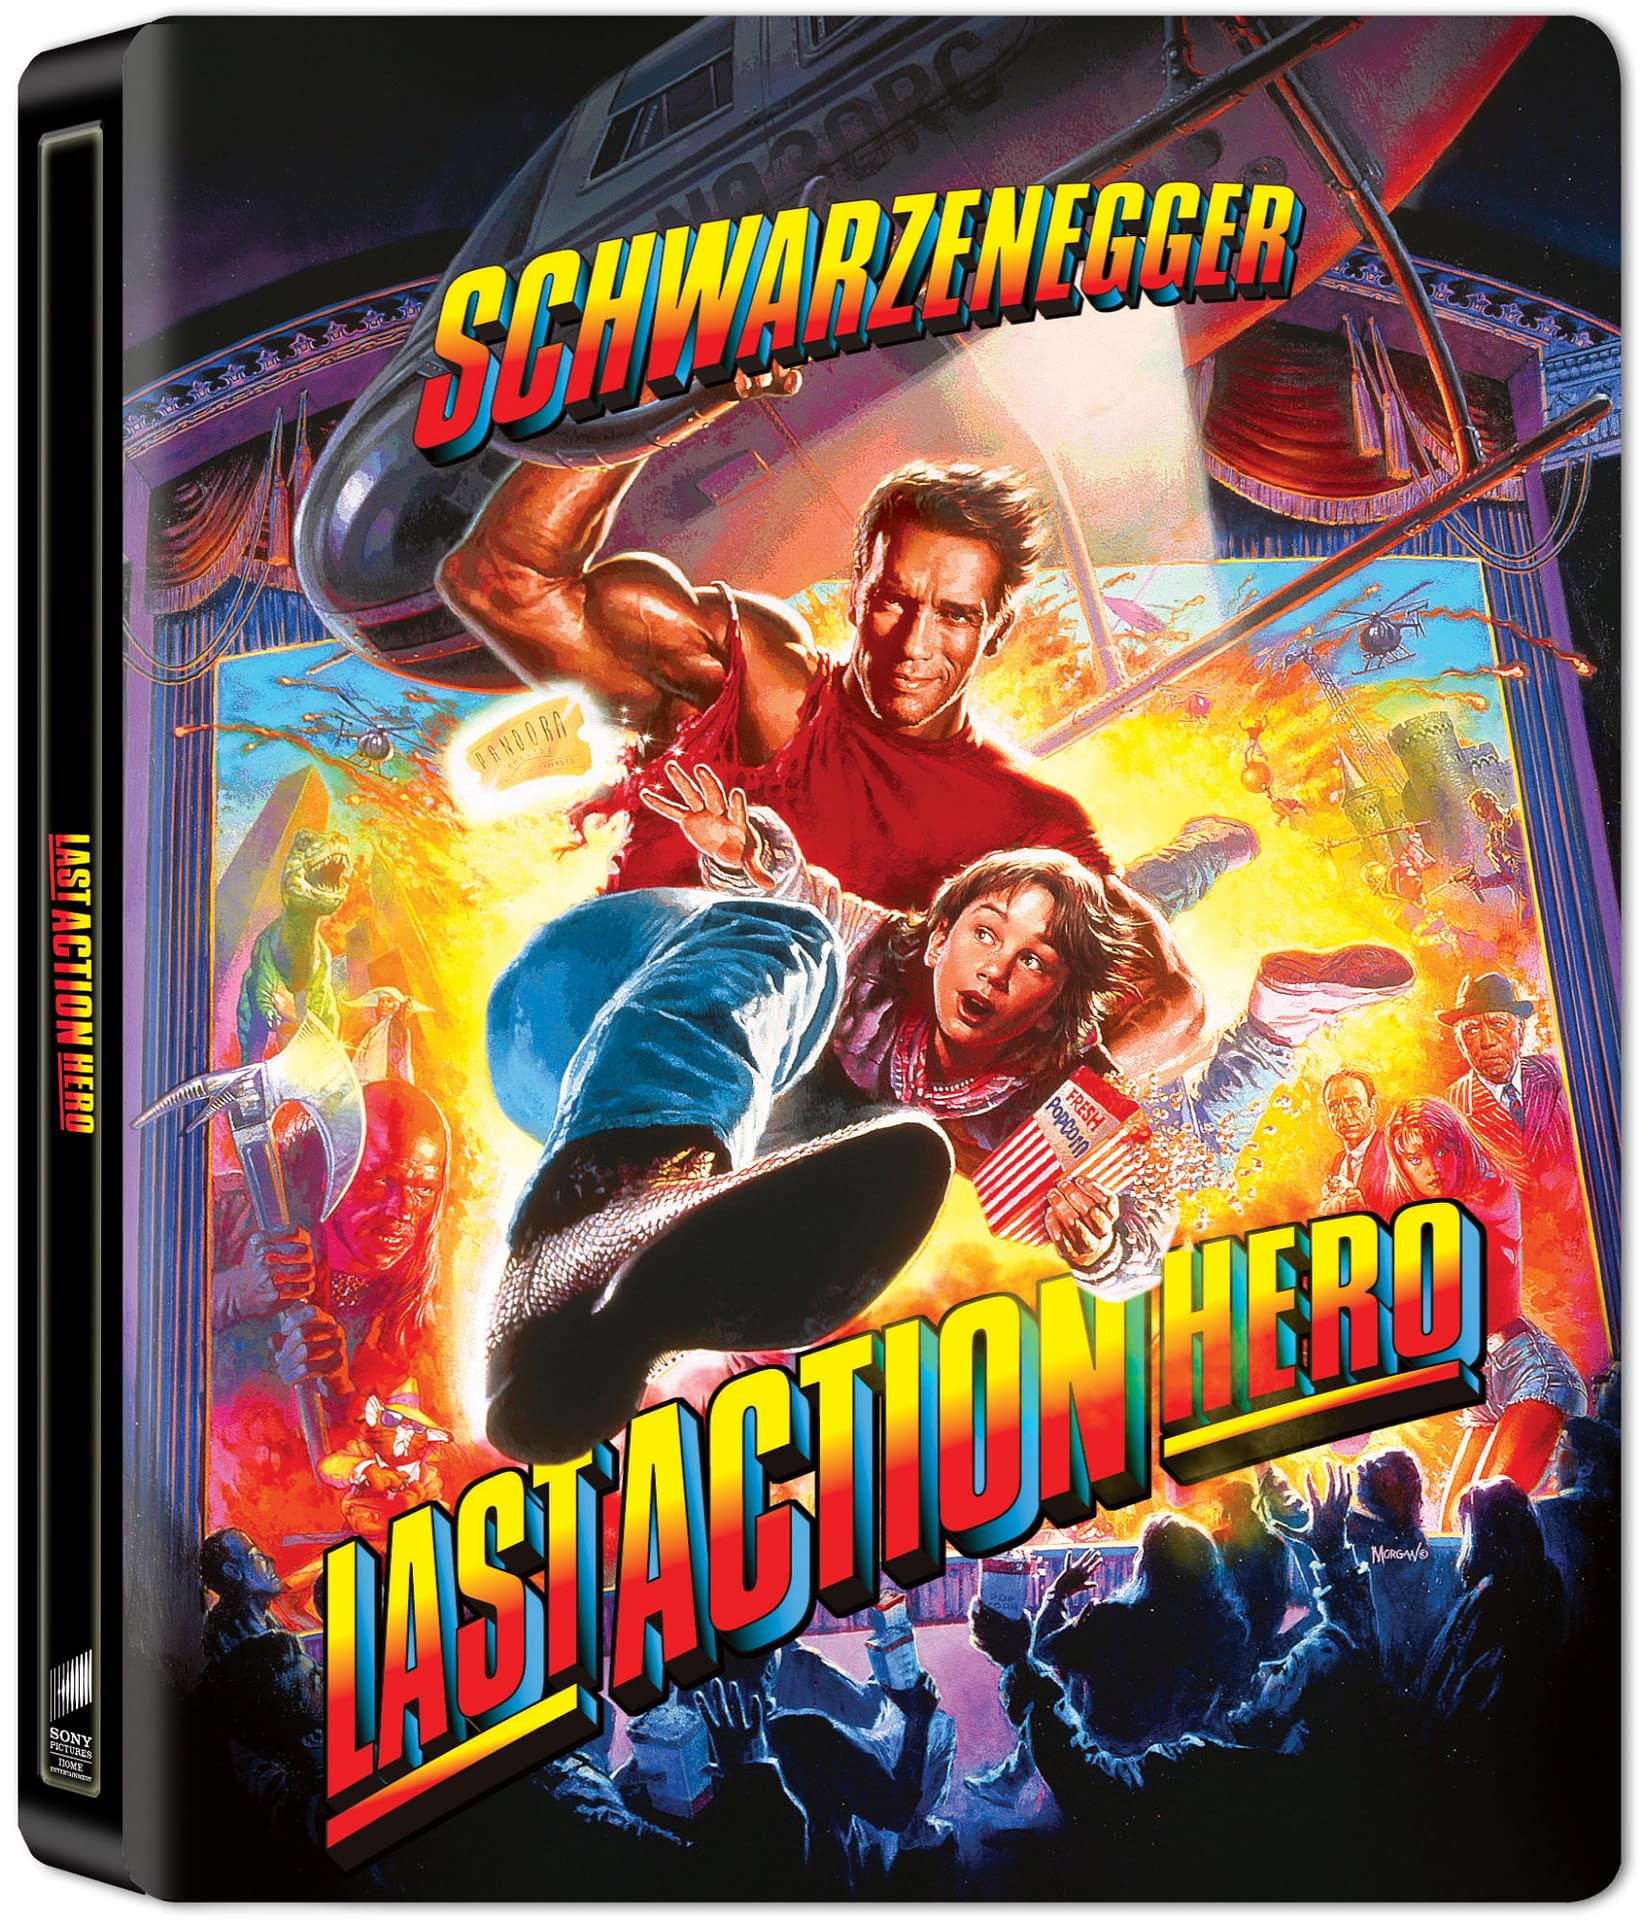 Finally, Last Action Hero Is Coming To 4K Blu-ray On May 18th